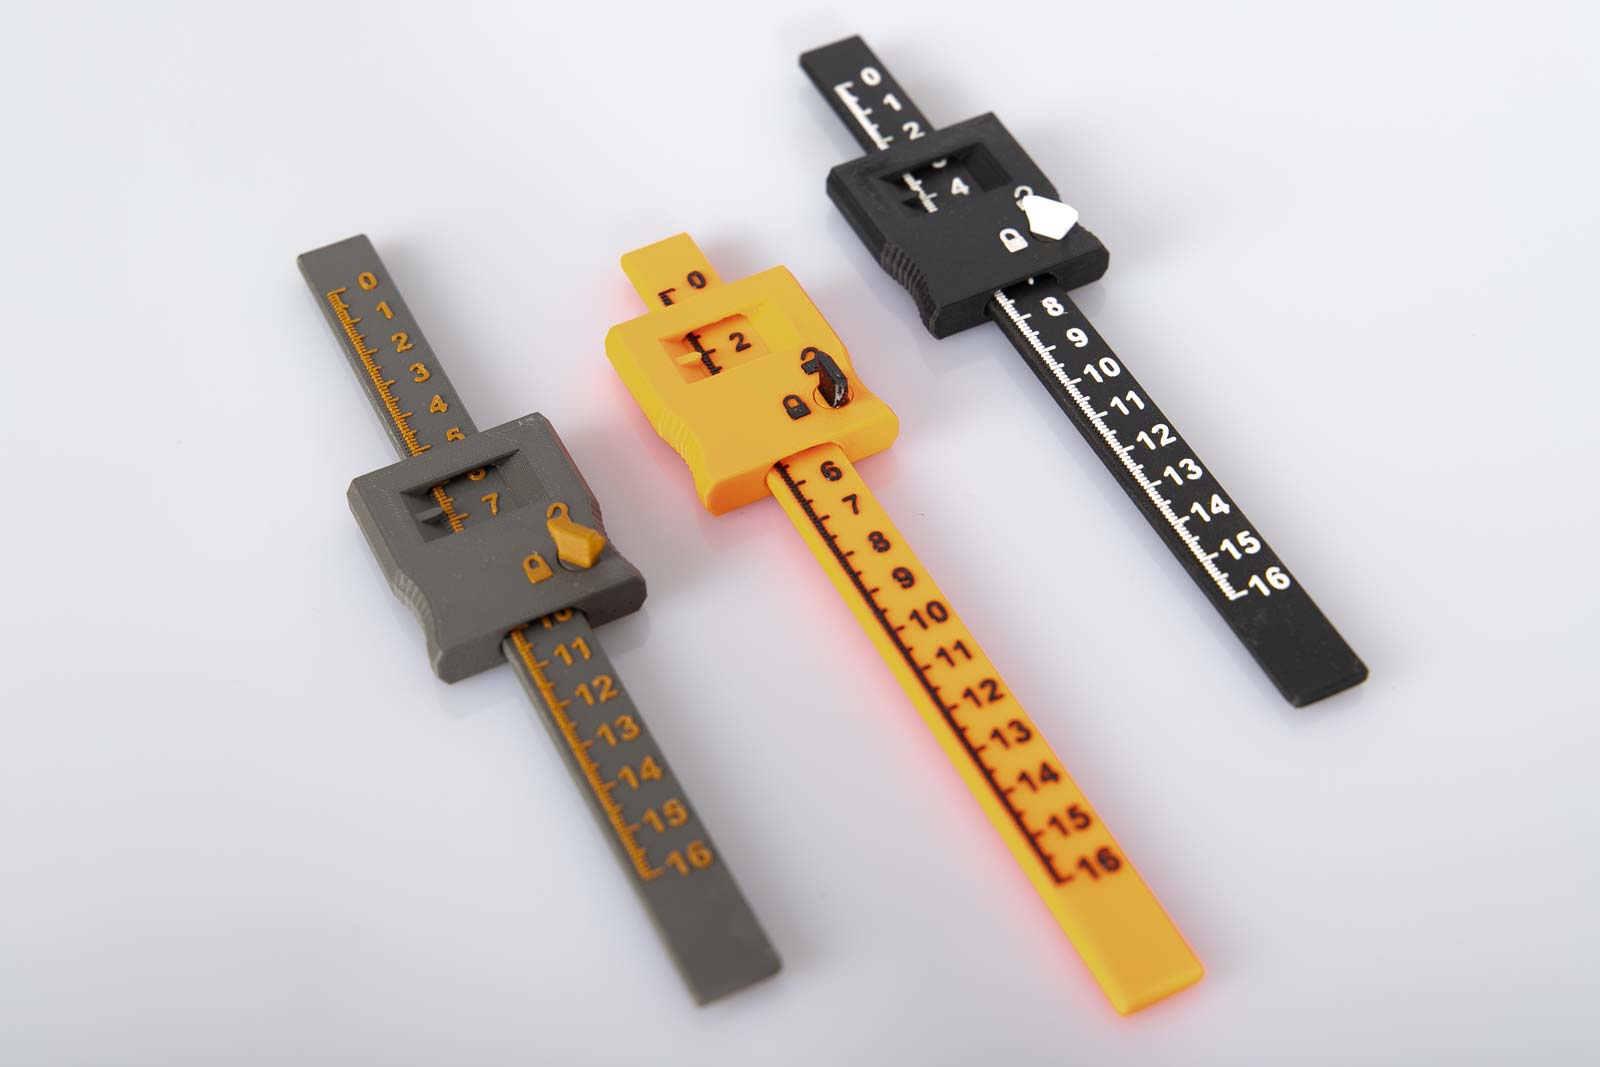 3D printed depth gauges depth calipers three different colors in full view